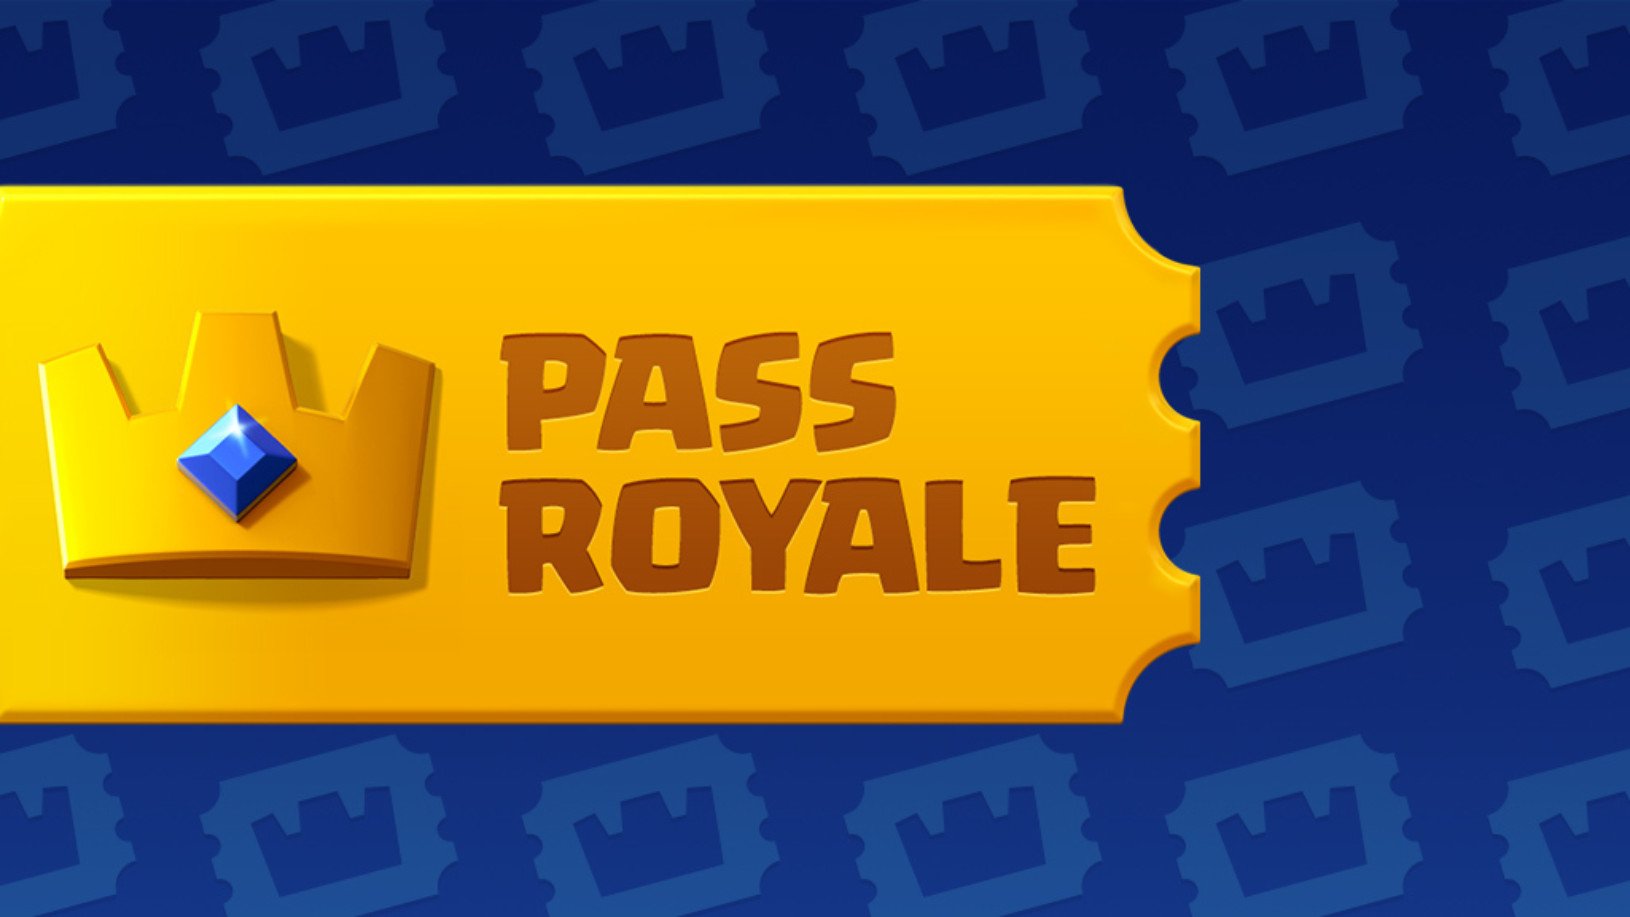 Clash Royale Pass Royale Season 1 FAQ: What’s Pass Royale, What Are the Perks, and How do I Get it?